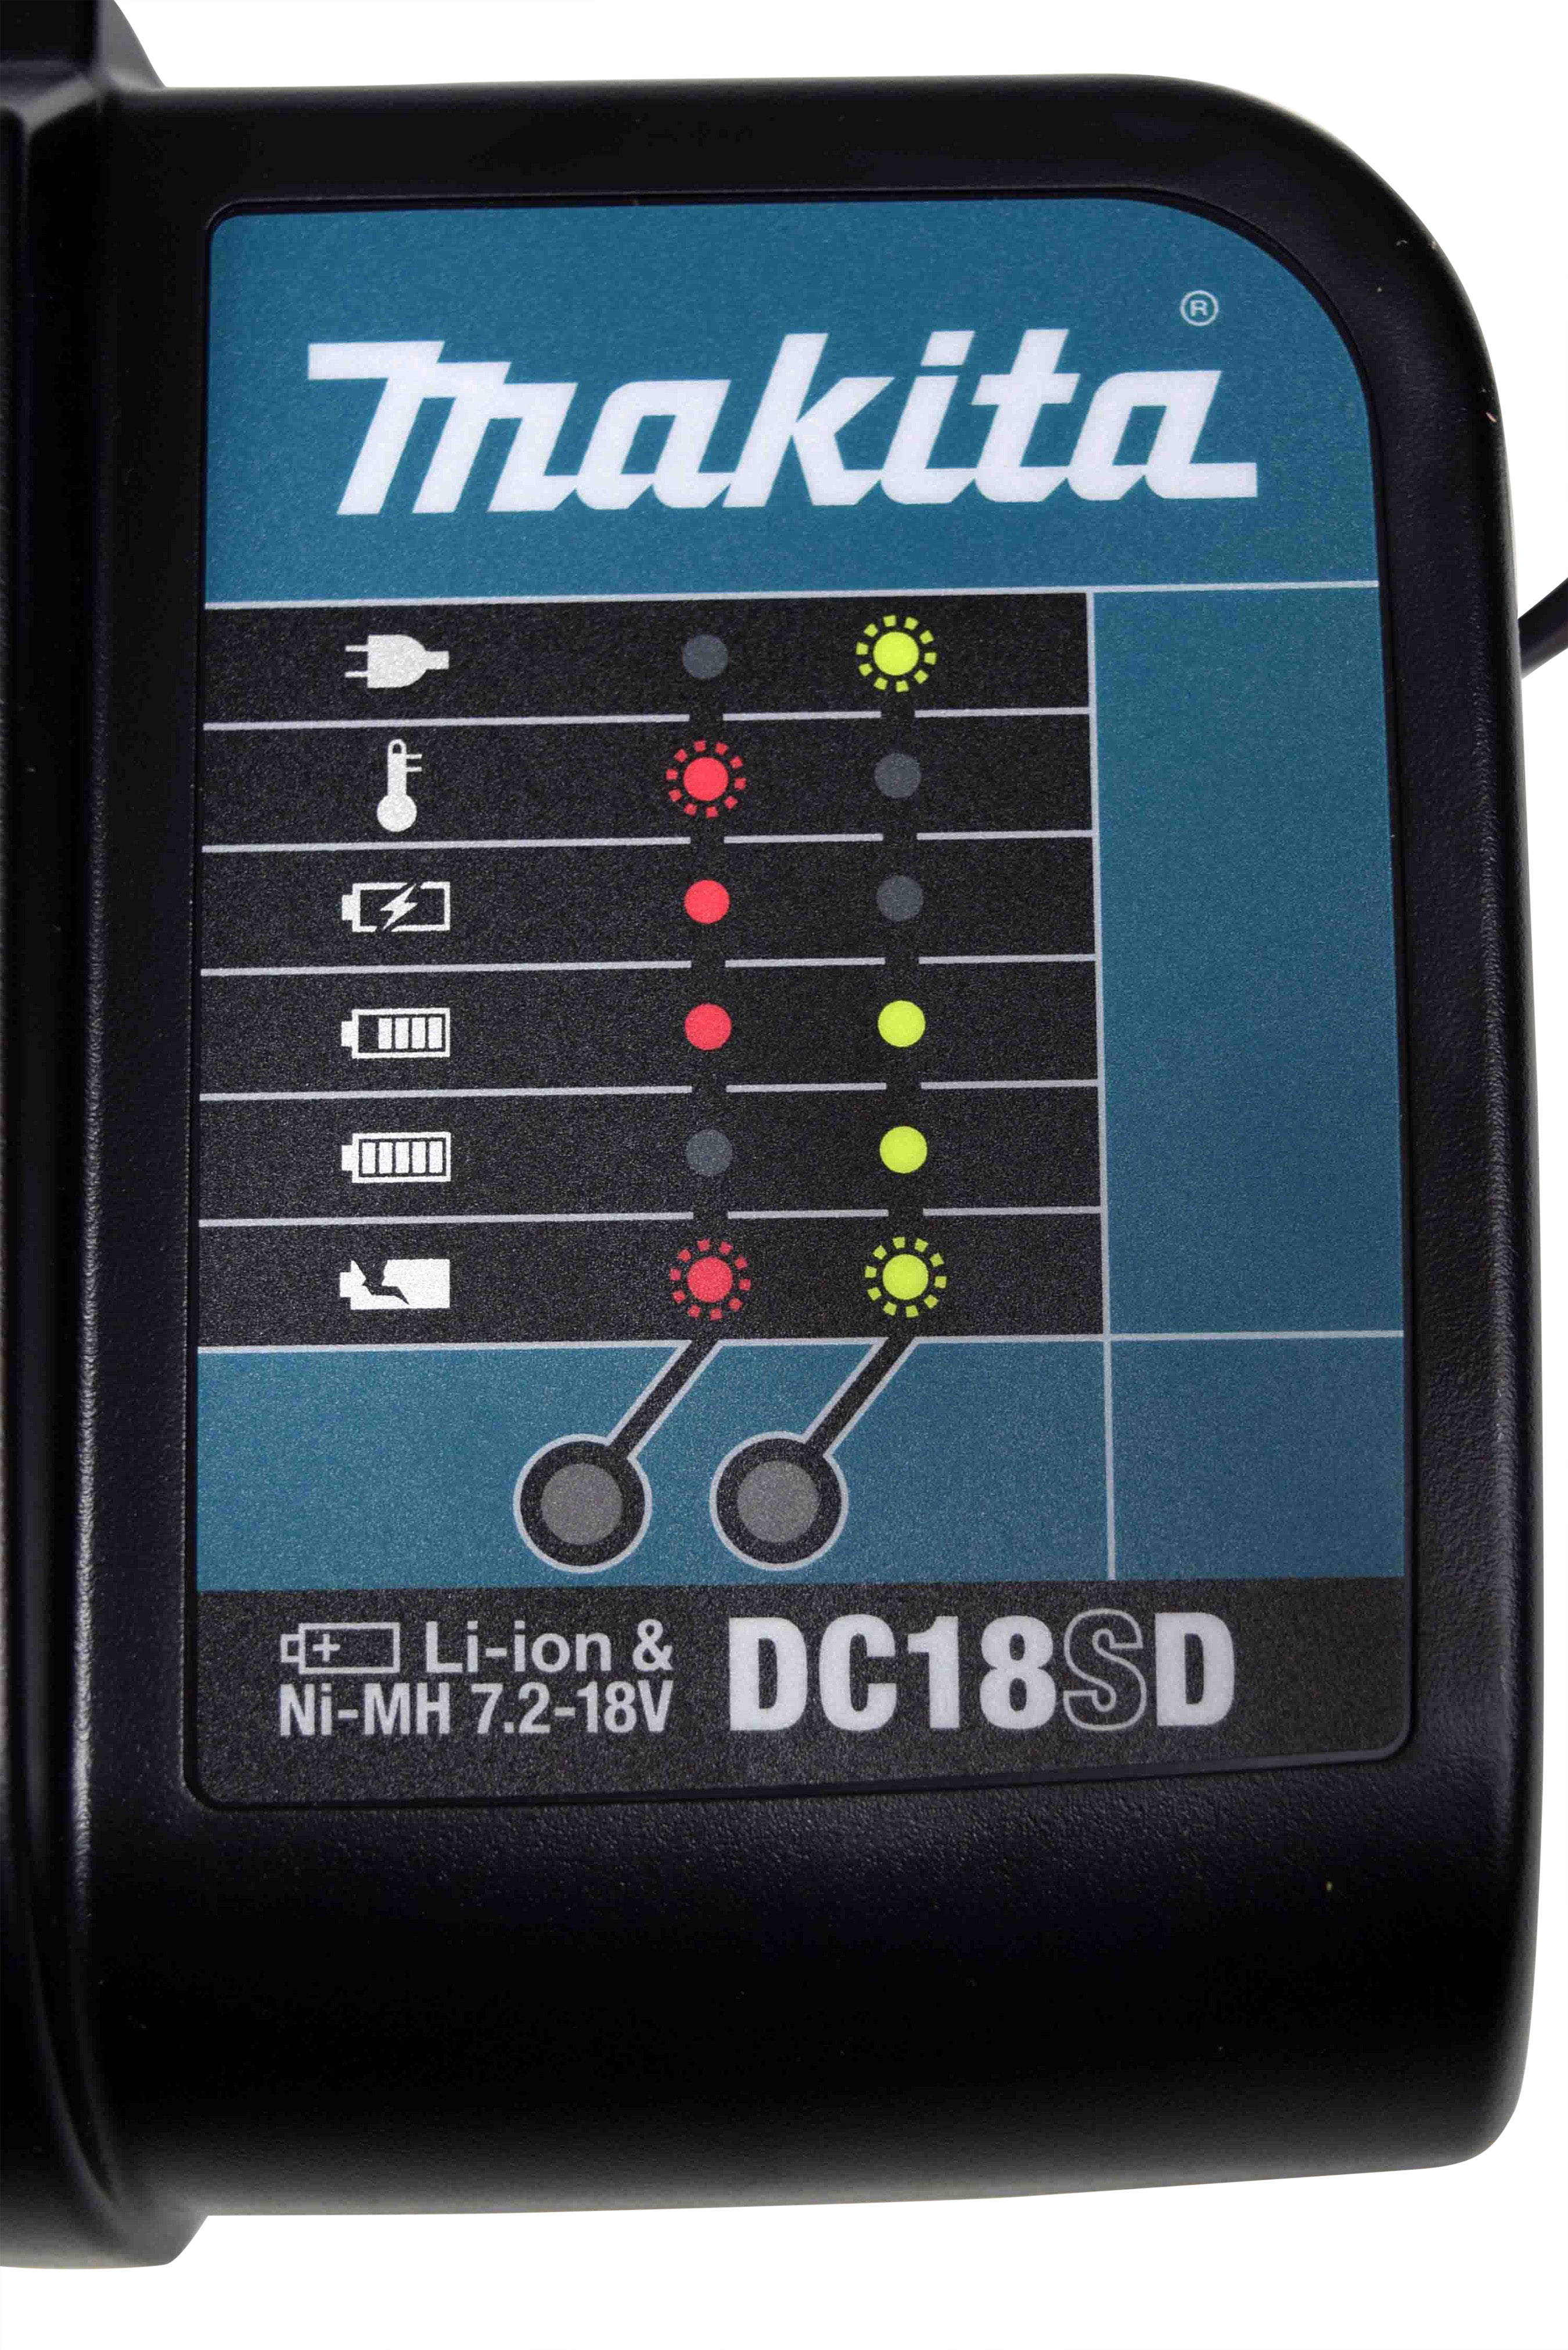 Makita BL1820BDC1 18V Compact Lithium-Ion Battery and Charger Starter Pack,  BL1820B, DC18RC (2.0Ah)